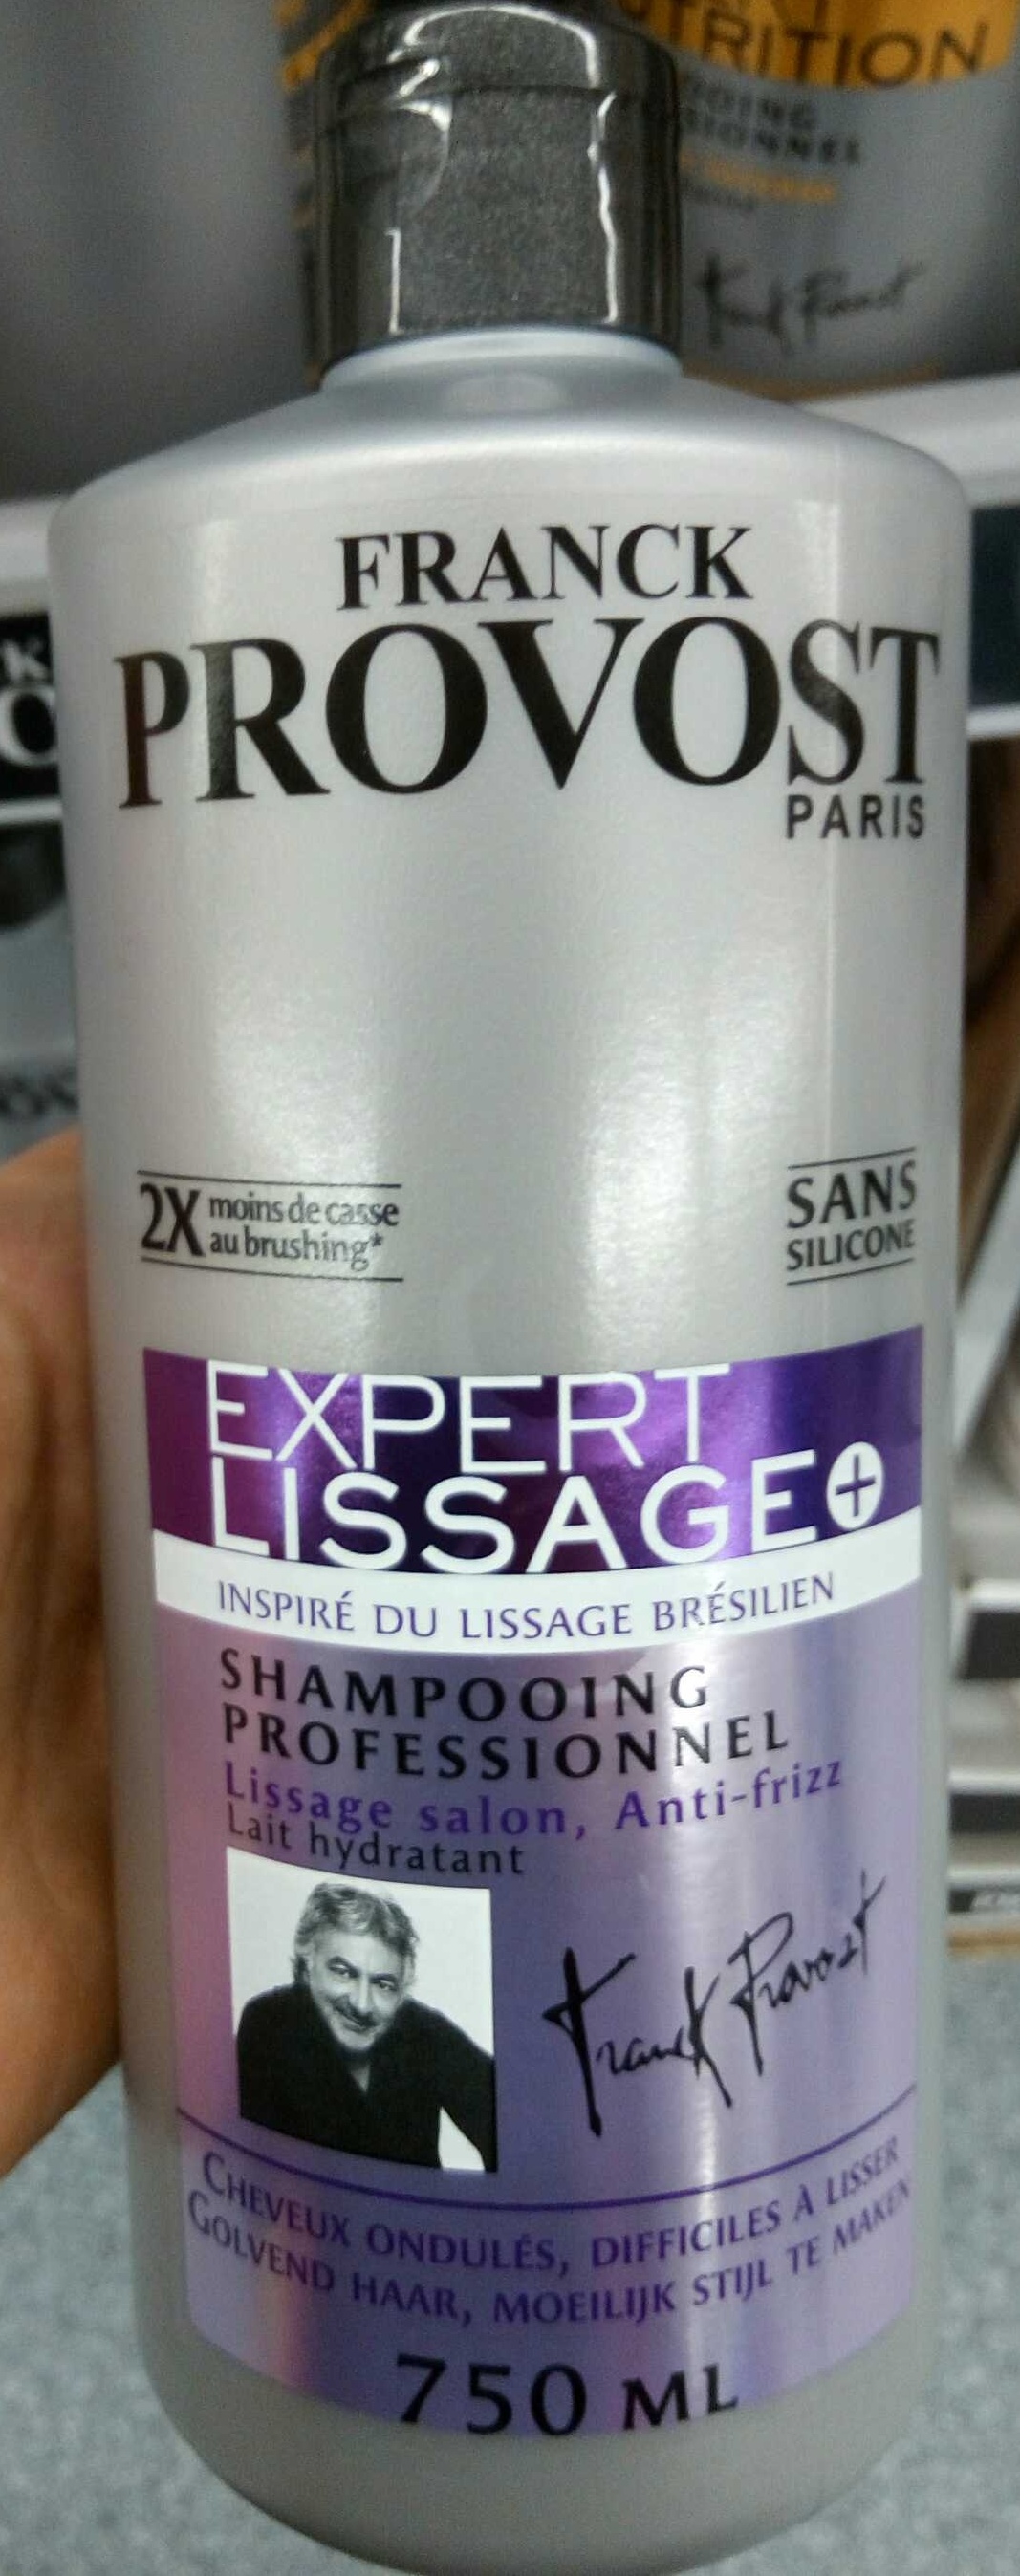 Expert lissage+ shampooing professionnel - 製品 - fr